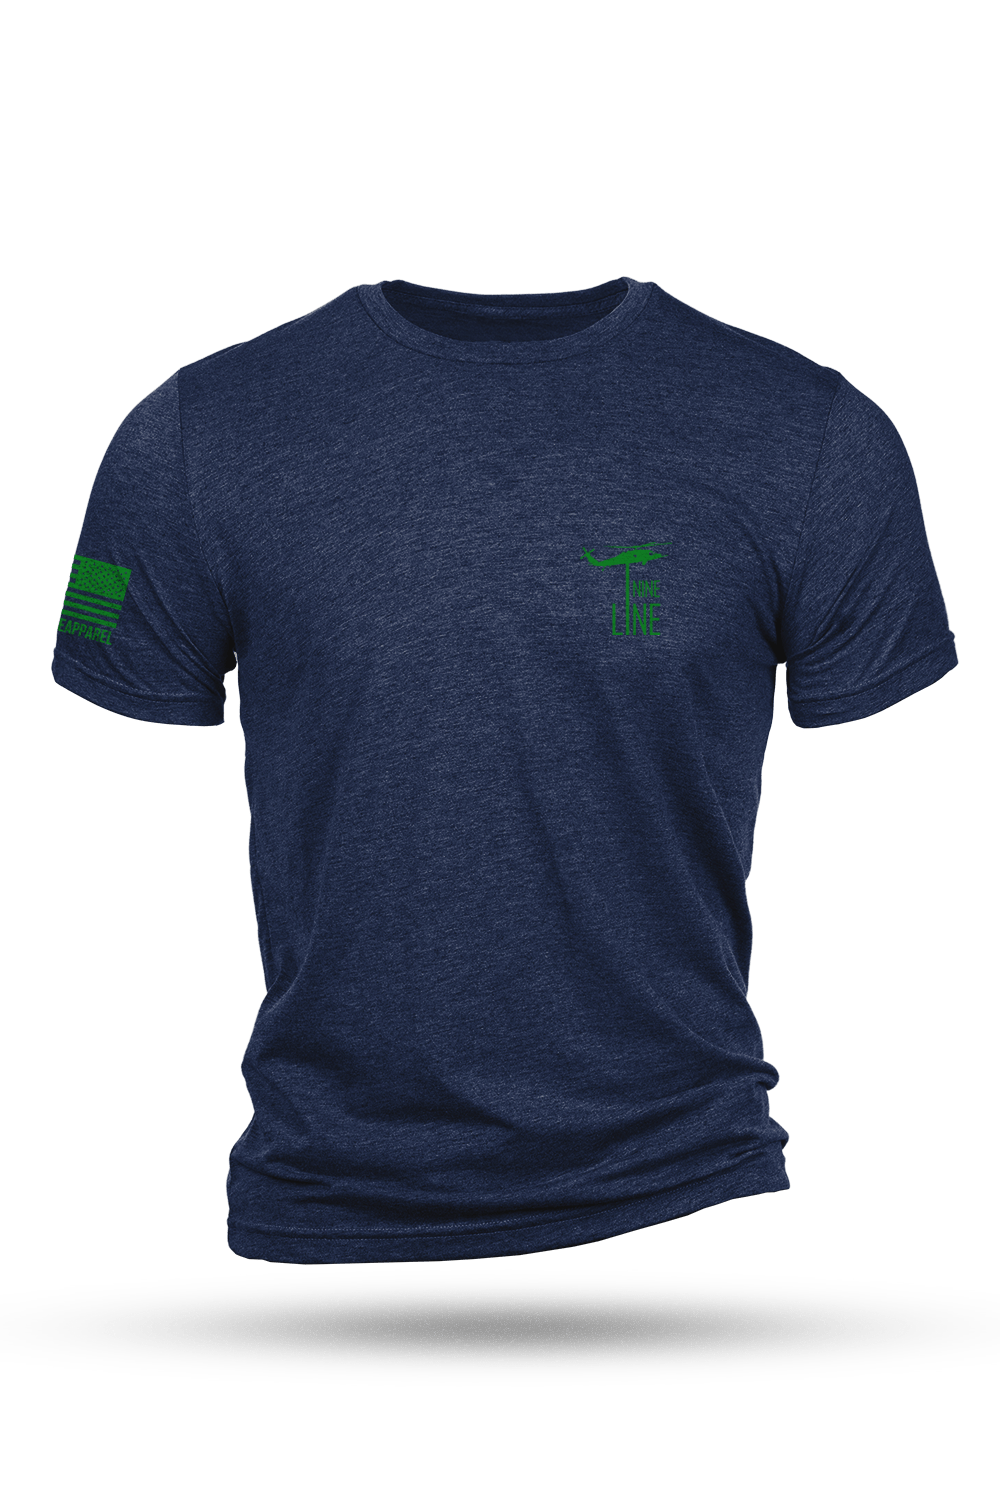 Men's Tri-Blend T-Shirt - St. Patrick's Day The Sweeter The Tune - Nine Line Apparel